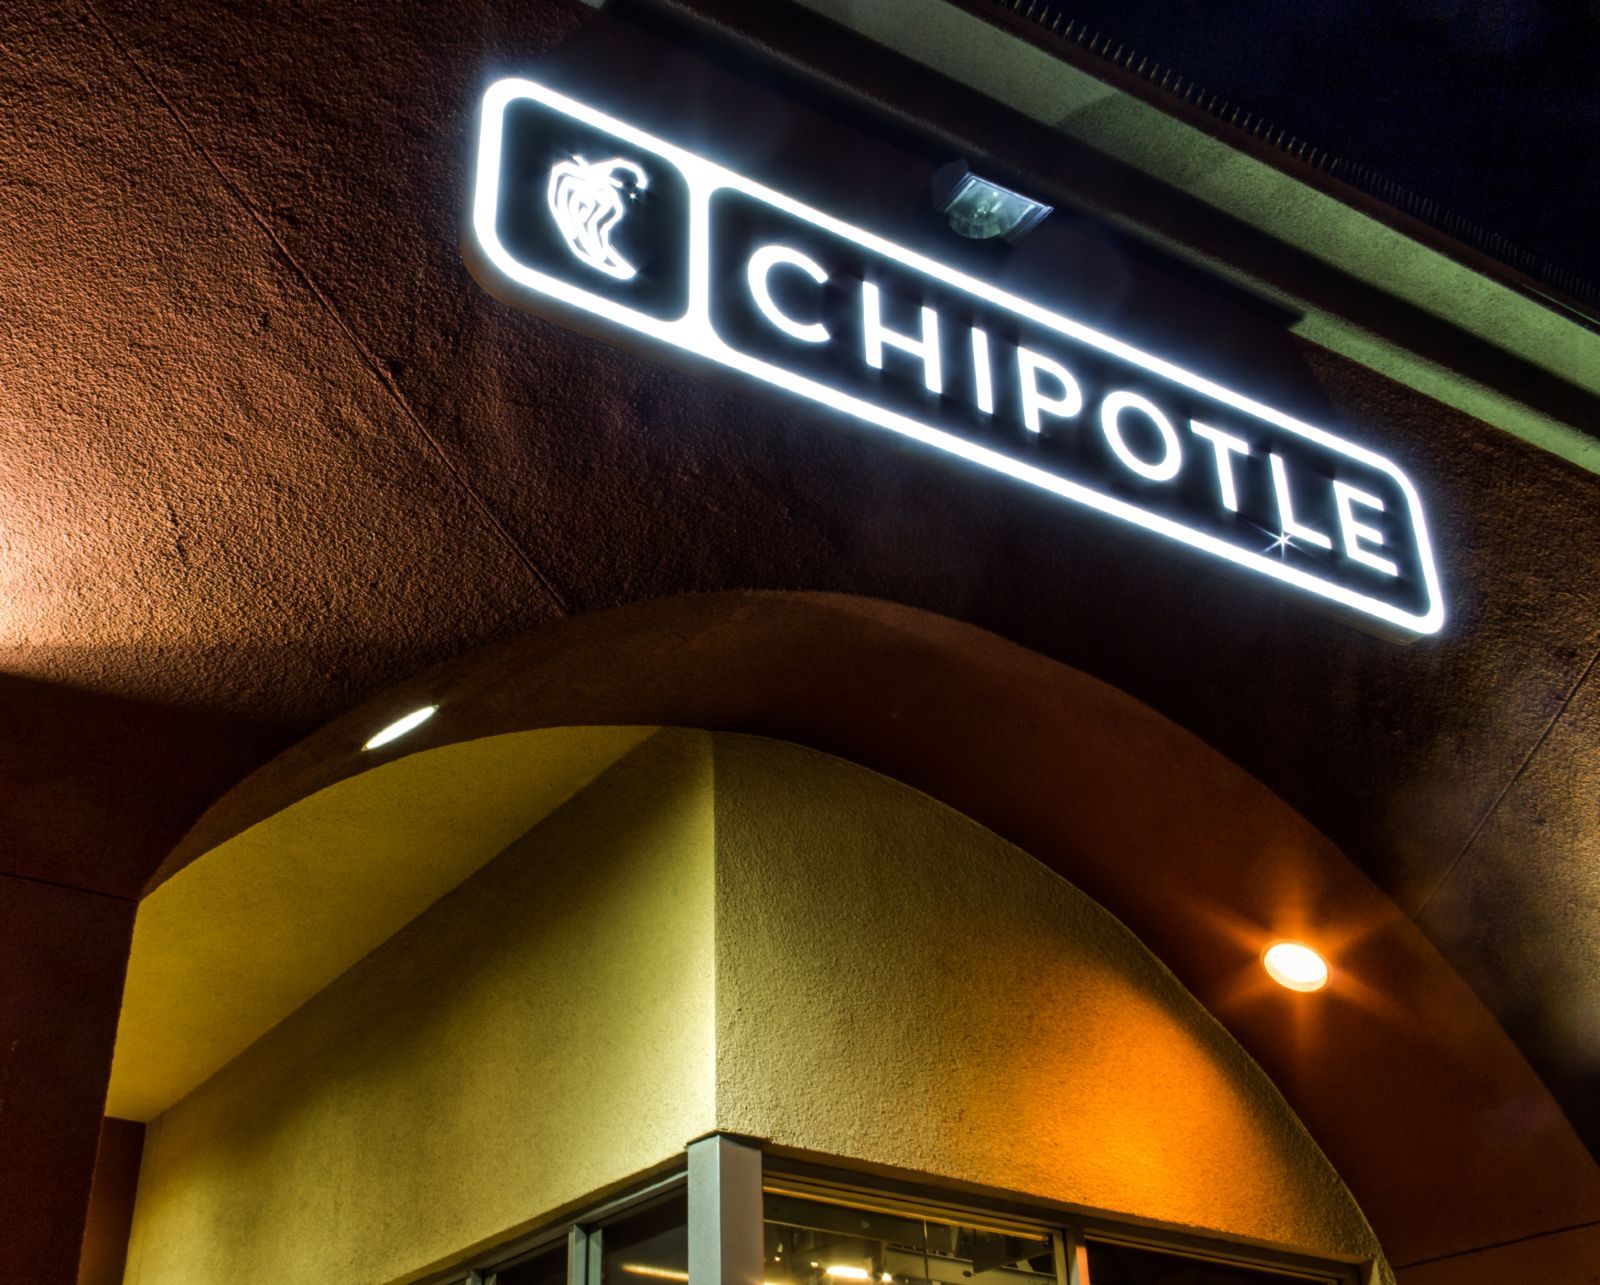 Chipotle sign on building at night - Chipotle employees